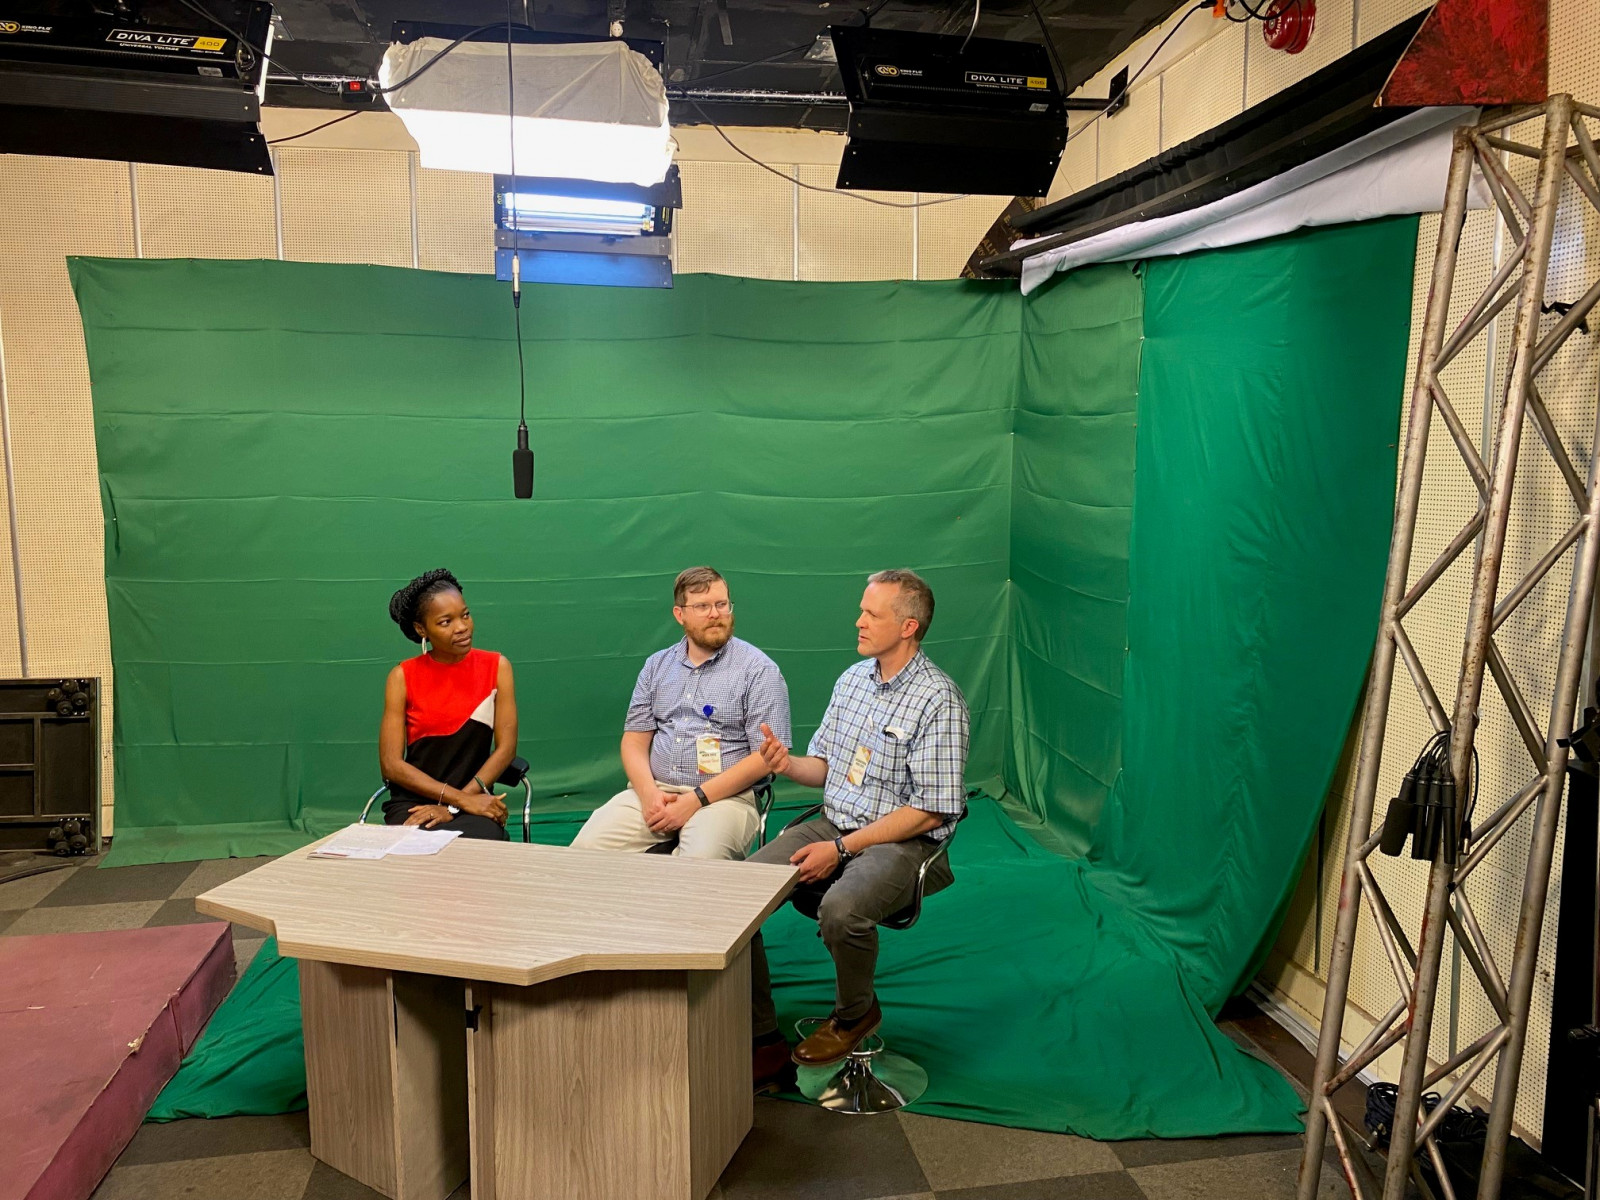 3 people at a desk in front of a green screen